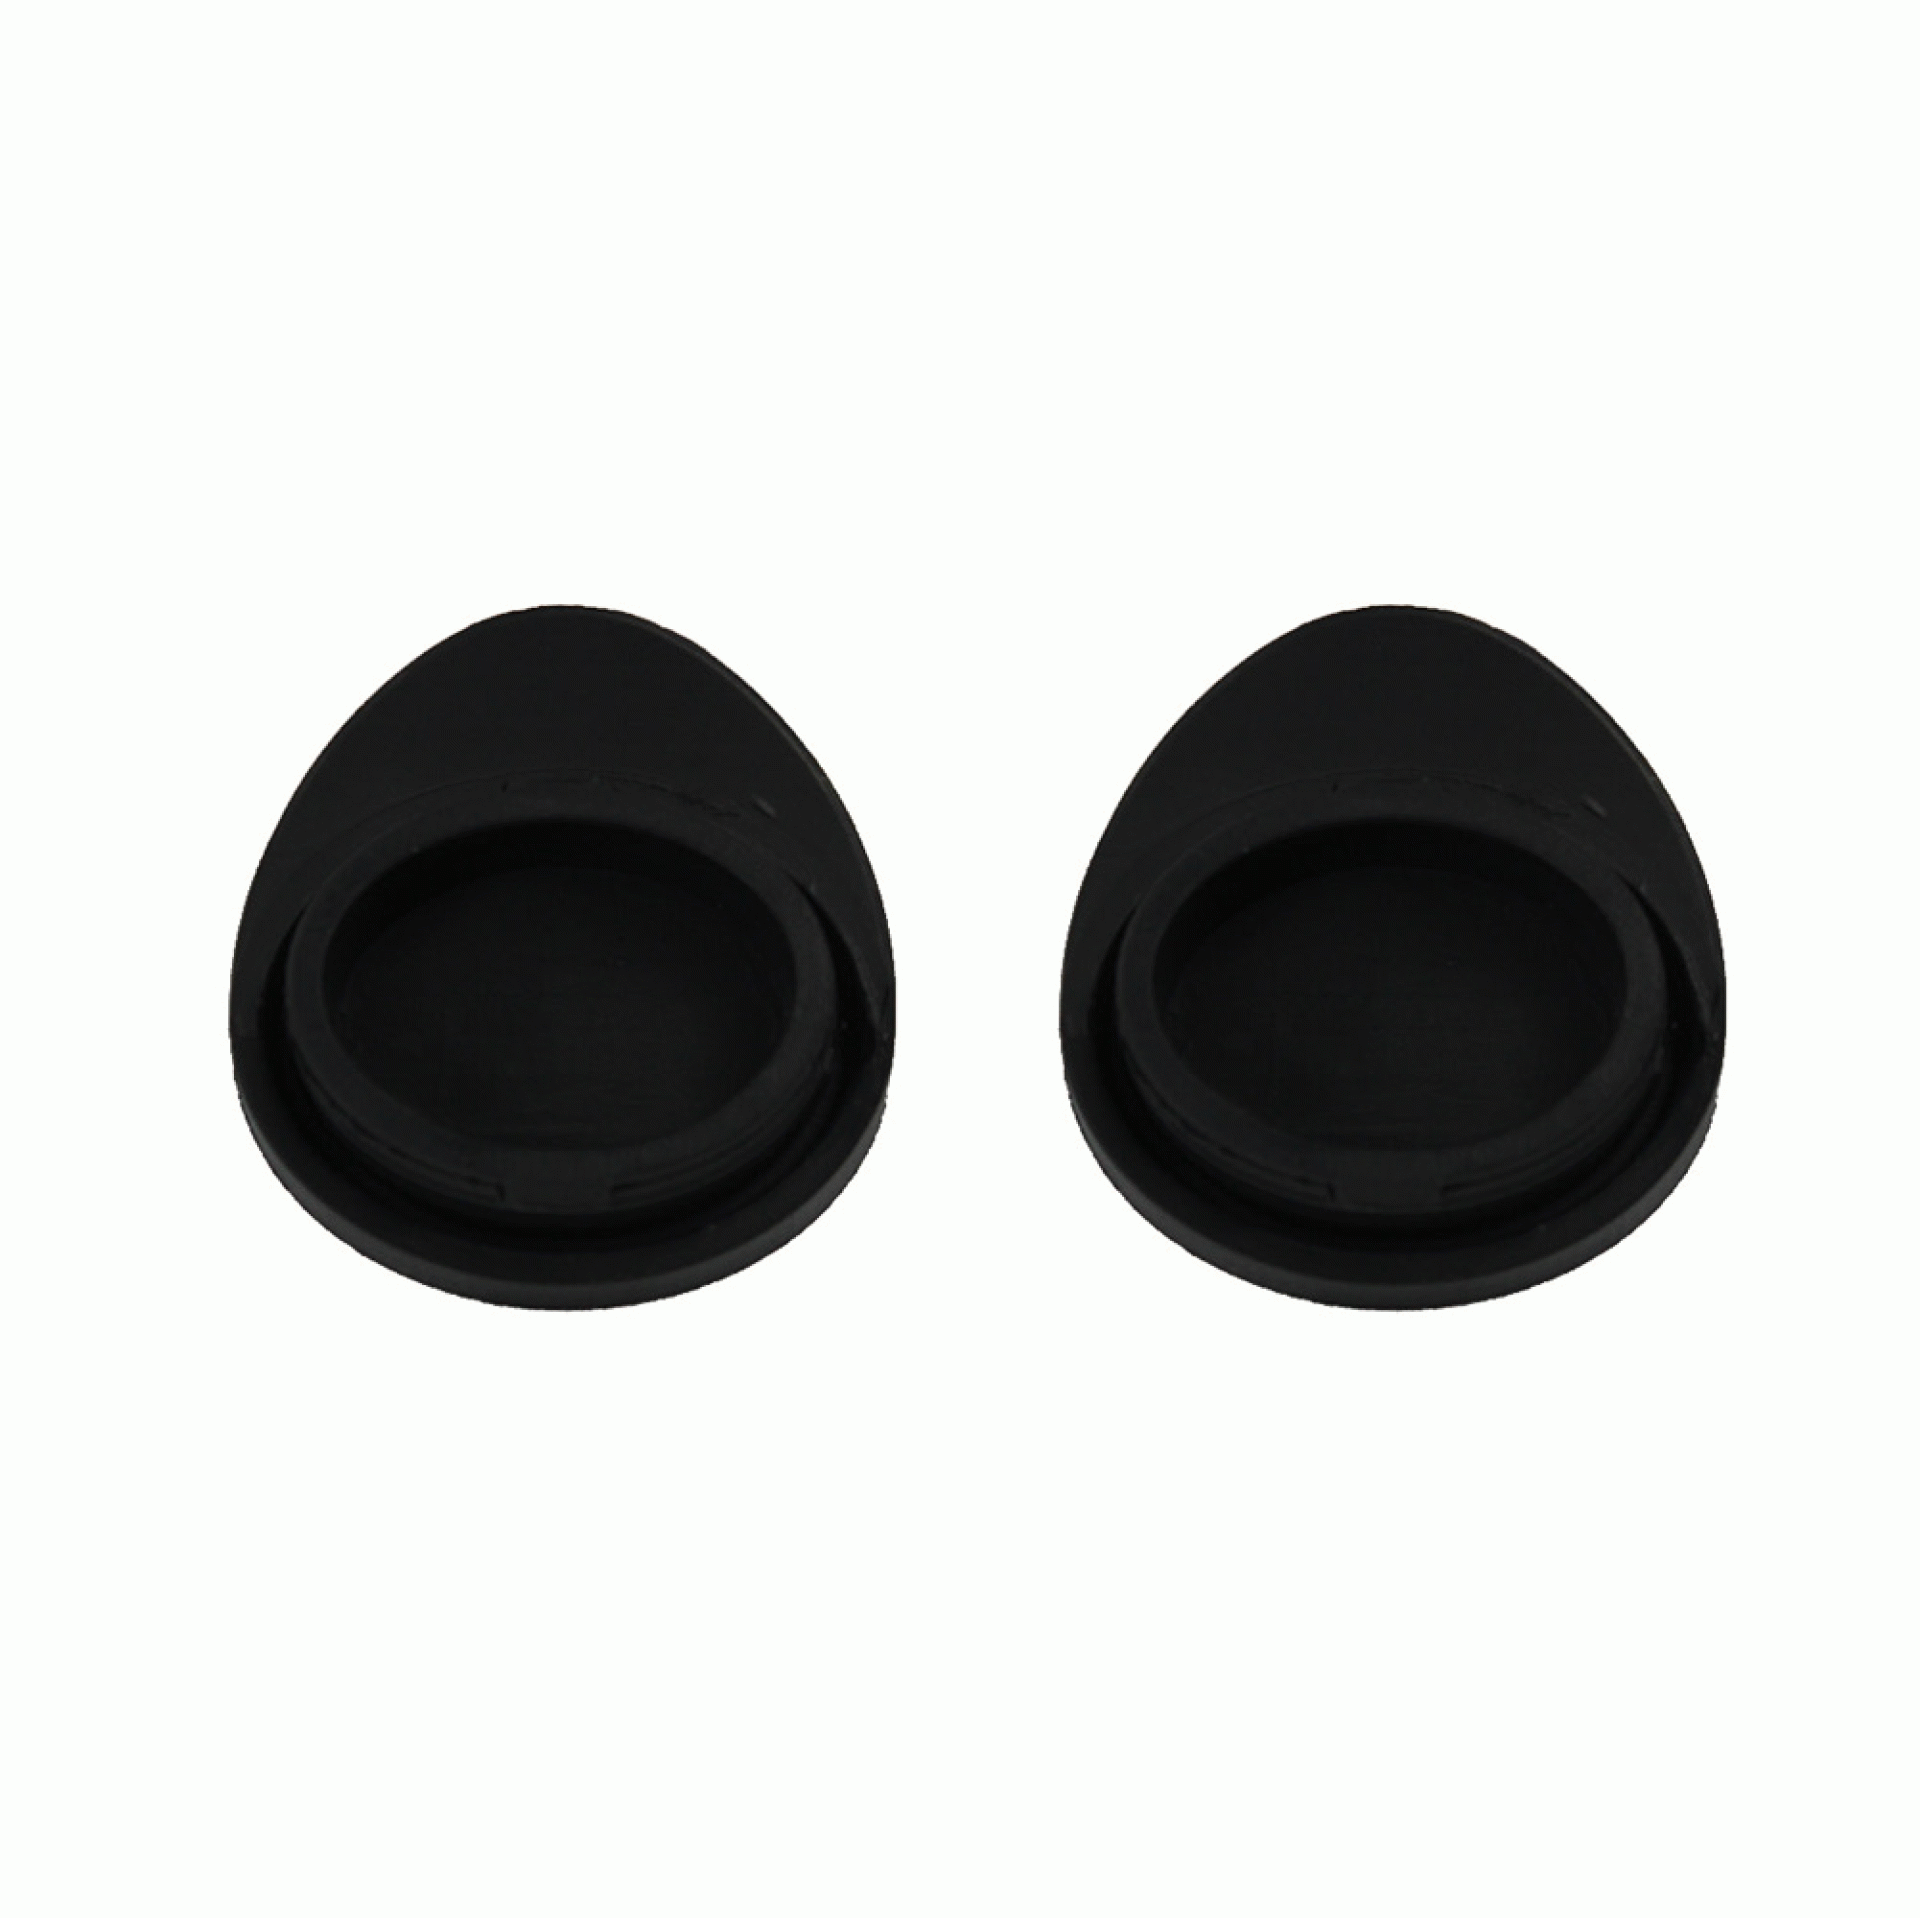 Lippert Components | 733924 | Plug for Override LCI Power Tongue Jack (Pair)